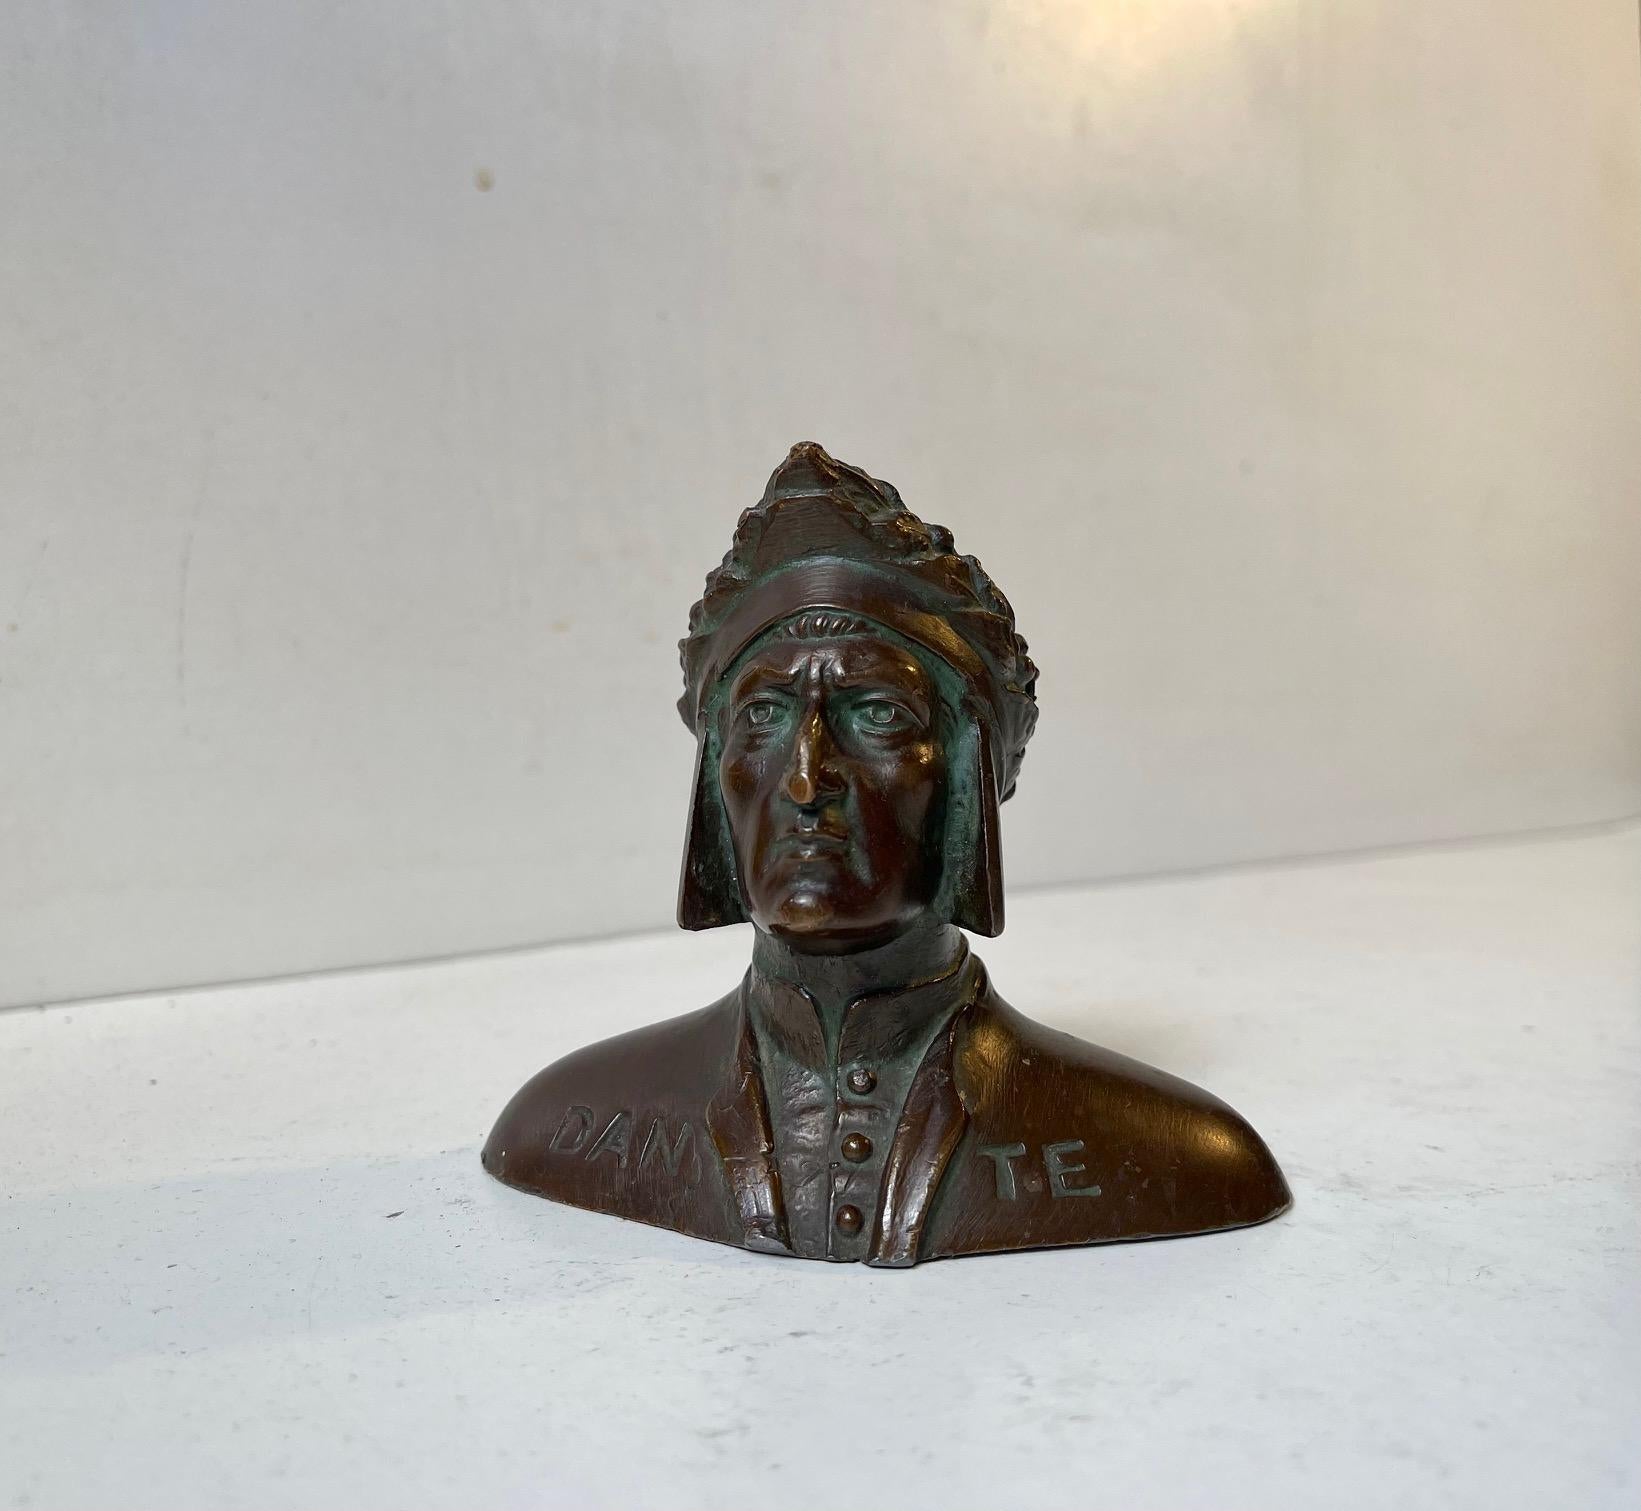 A skillfully cast miniature buste of the Italian Poet Dante Alighieri. It is a Grand Tour item meaning it was purchased by travelers through Europe: Rome, Venice, Paris, Vienna - during the 19th century or earlier. This particular example was made